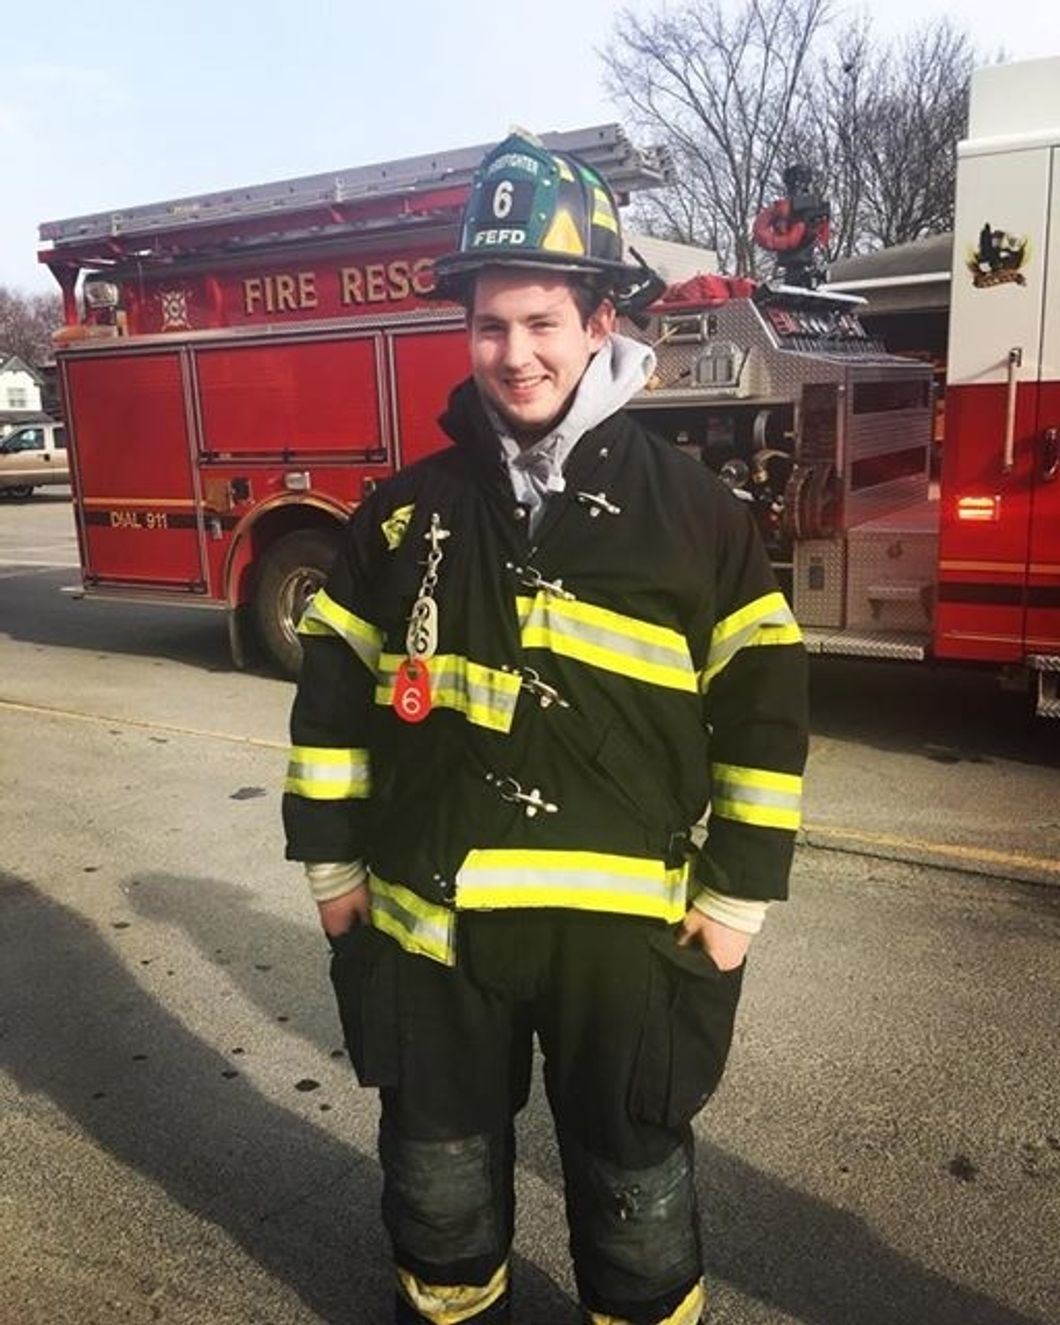 What It's Like Being In Love With a Volunteer Firefighter